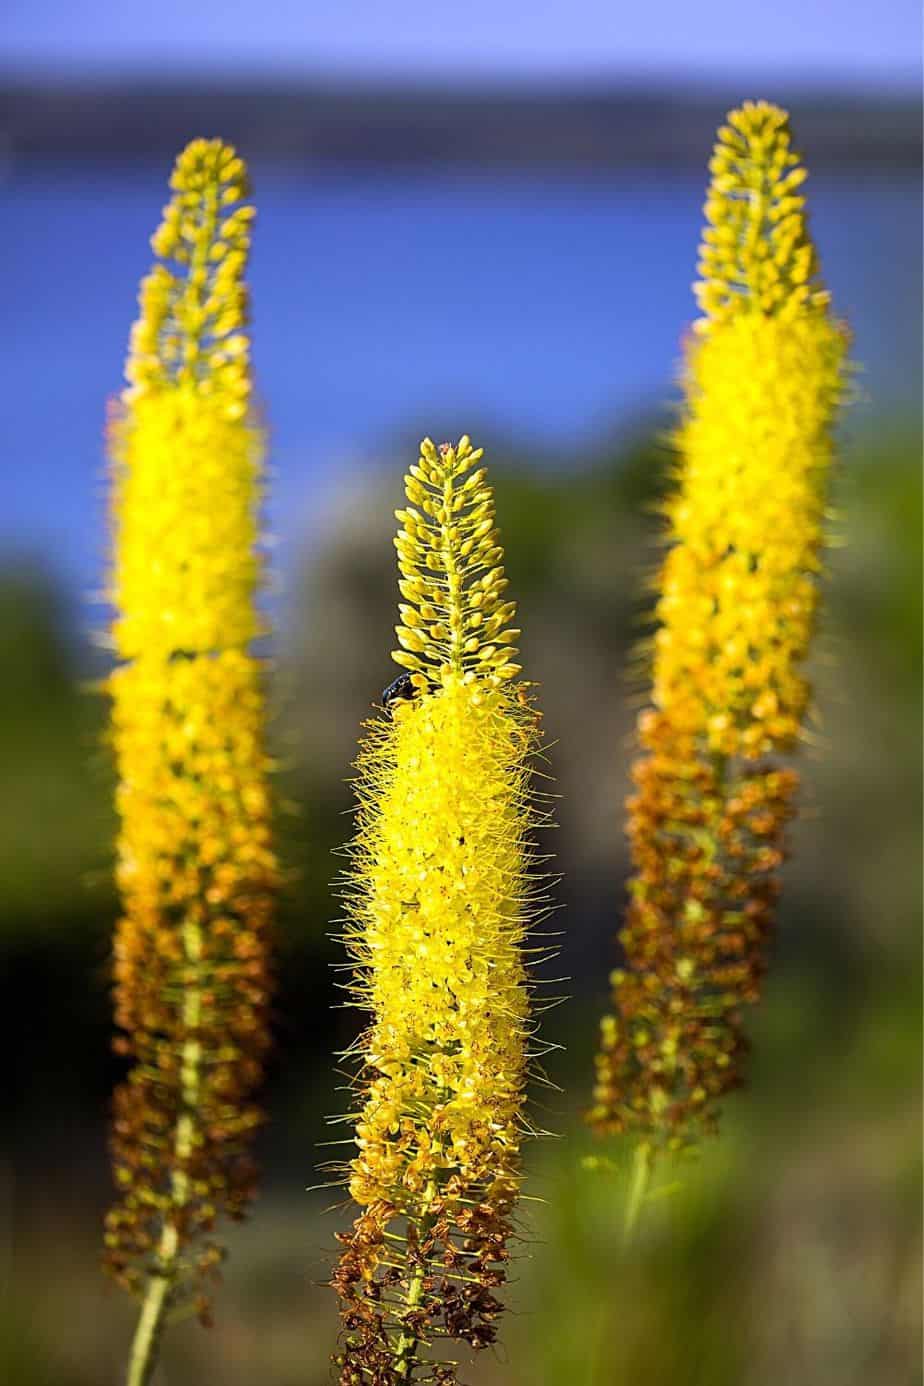 Foxtail Lily, aka Desert Candles, is another plant that you can add to your colorful southeast facing garden